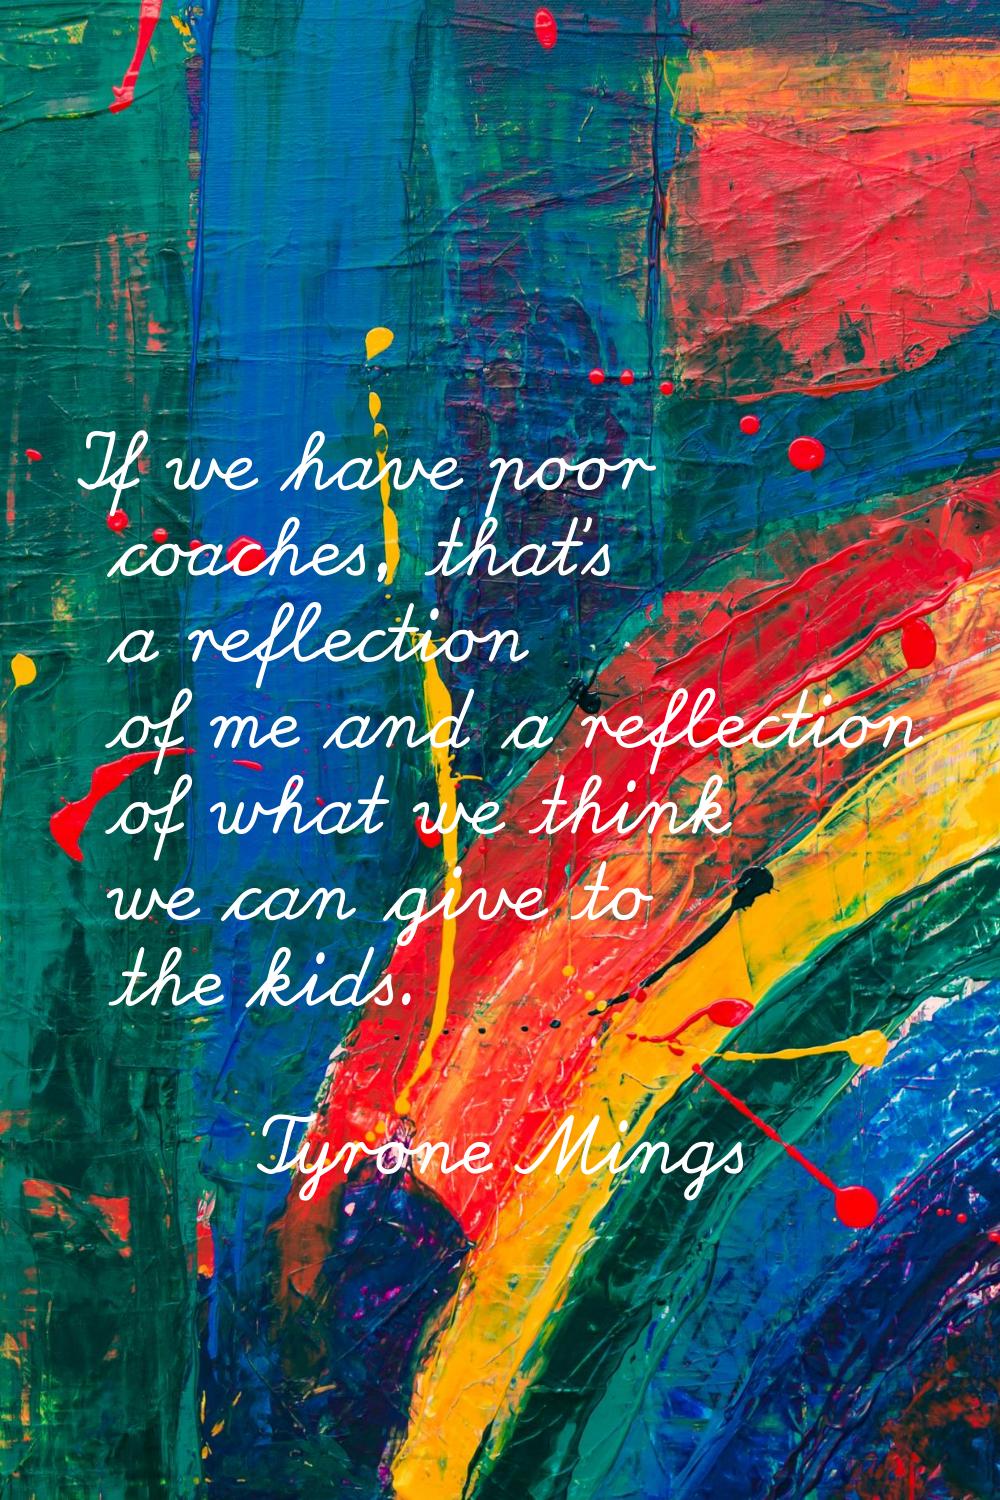 If we have poor coaches, that’s a reflection of me and a reflection of what we think we can give to